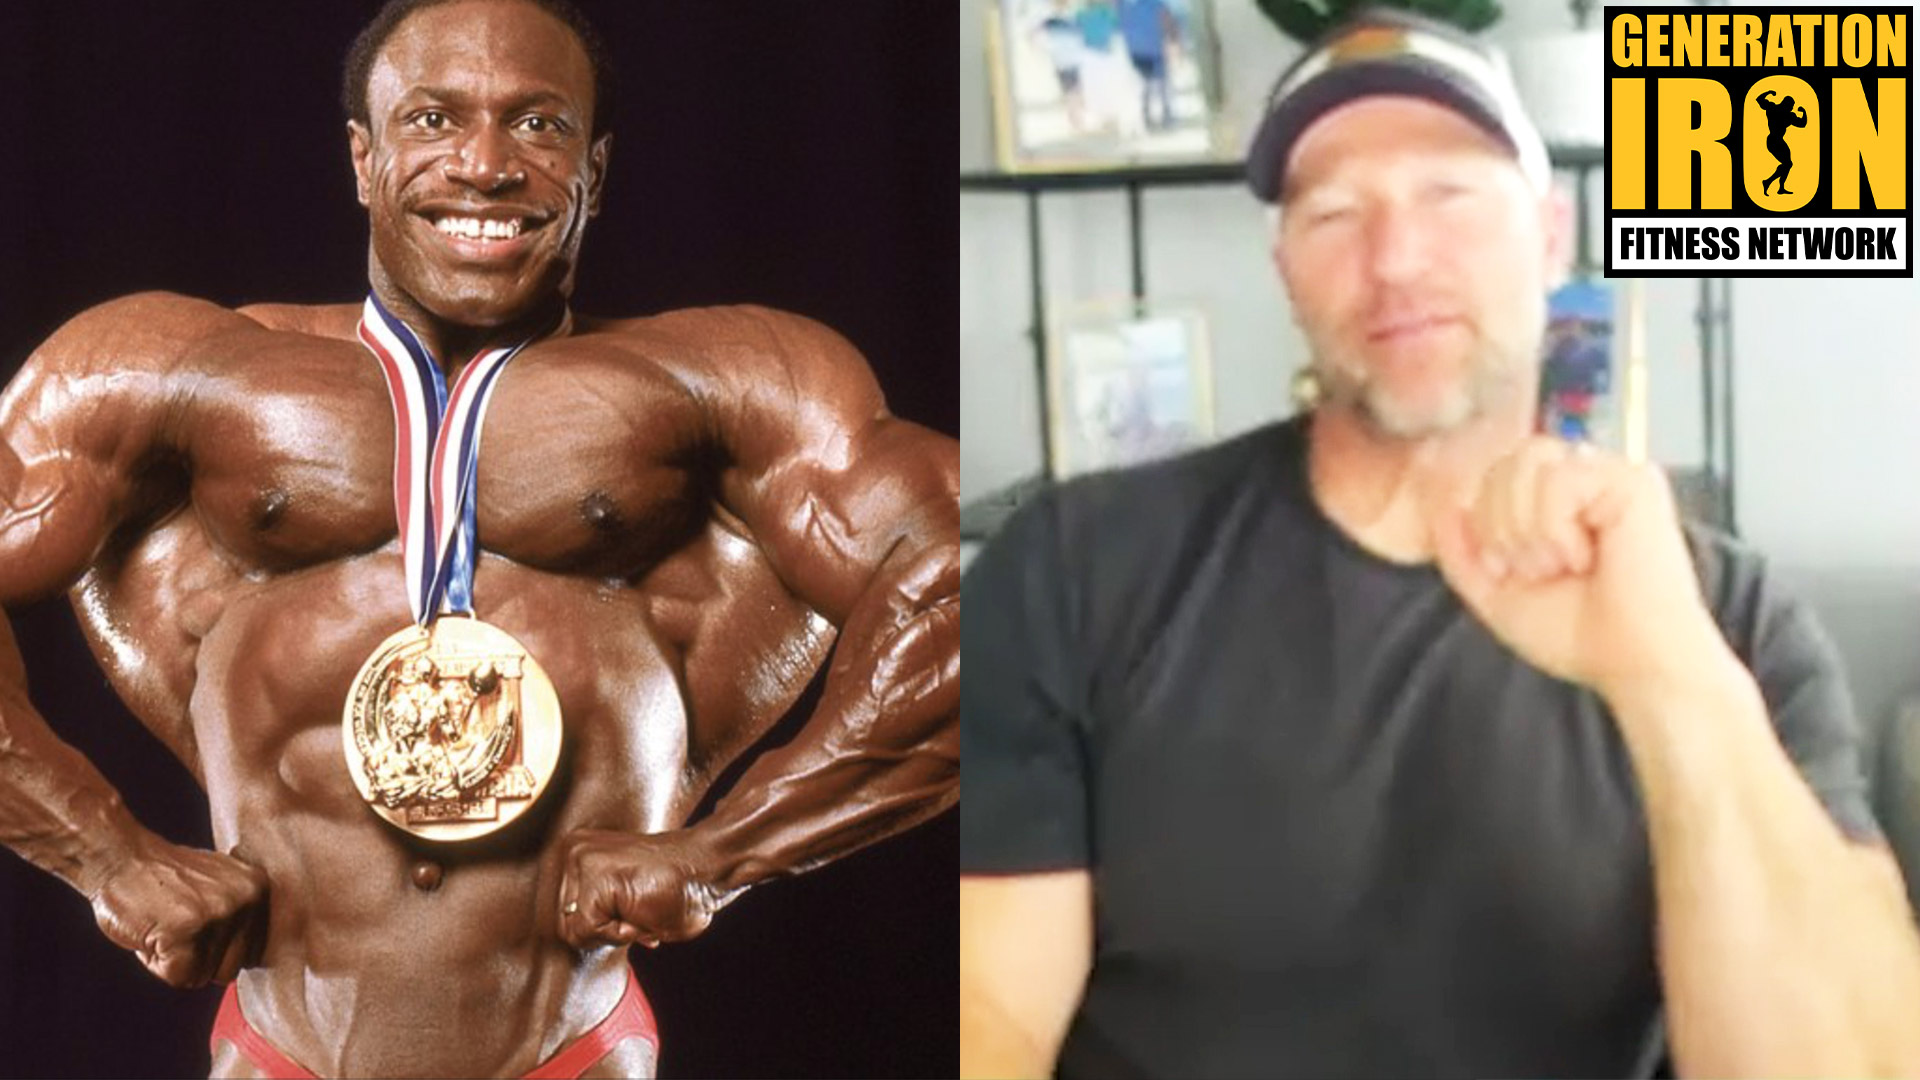 Gunter Schlierkamp: The Biggest Reason Lee Haney Should Be Considered Greatest Of All Time